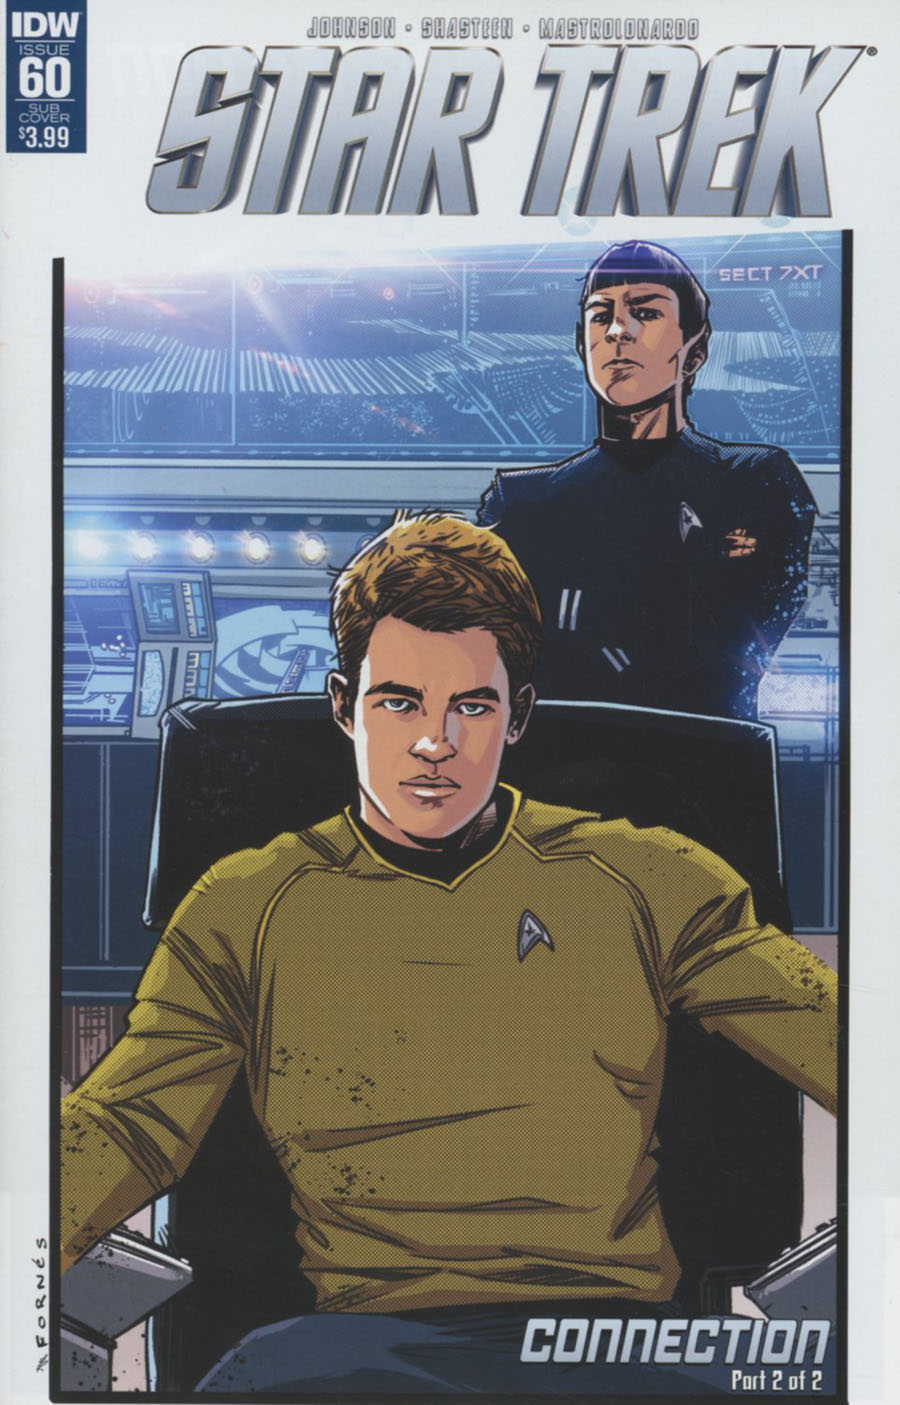 Star Trek (IDW) #60 Cover B Variant Jorge Fornes Subscription Cover